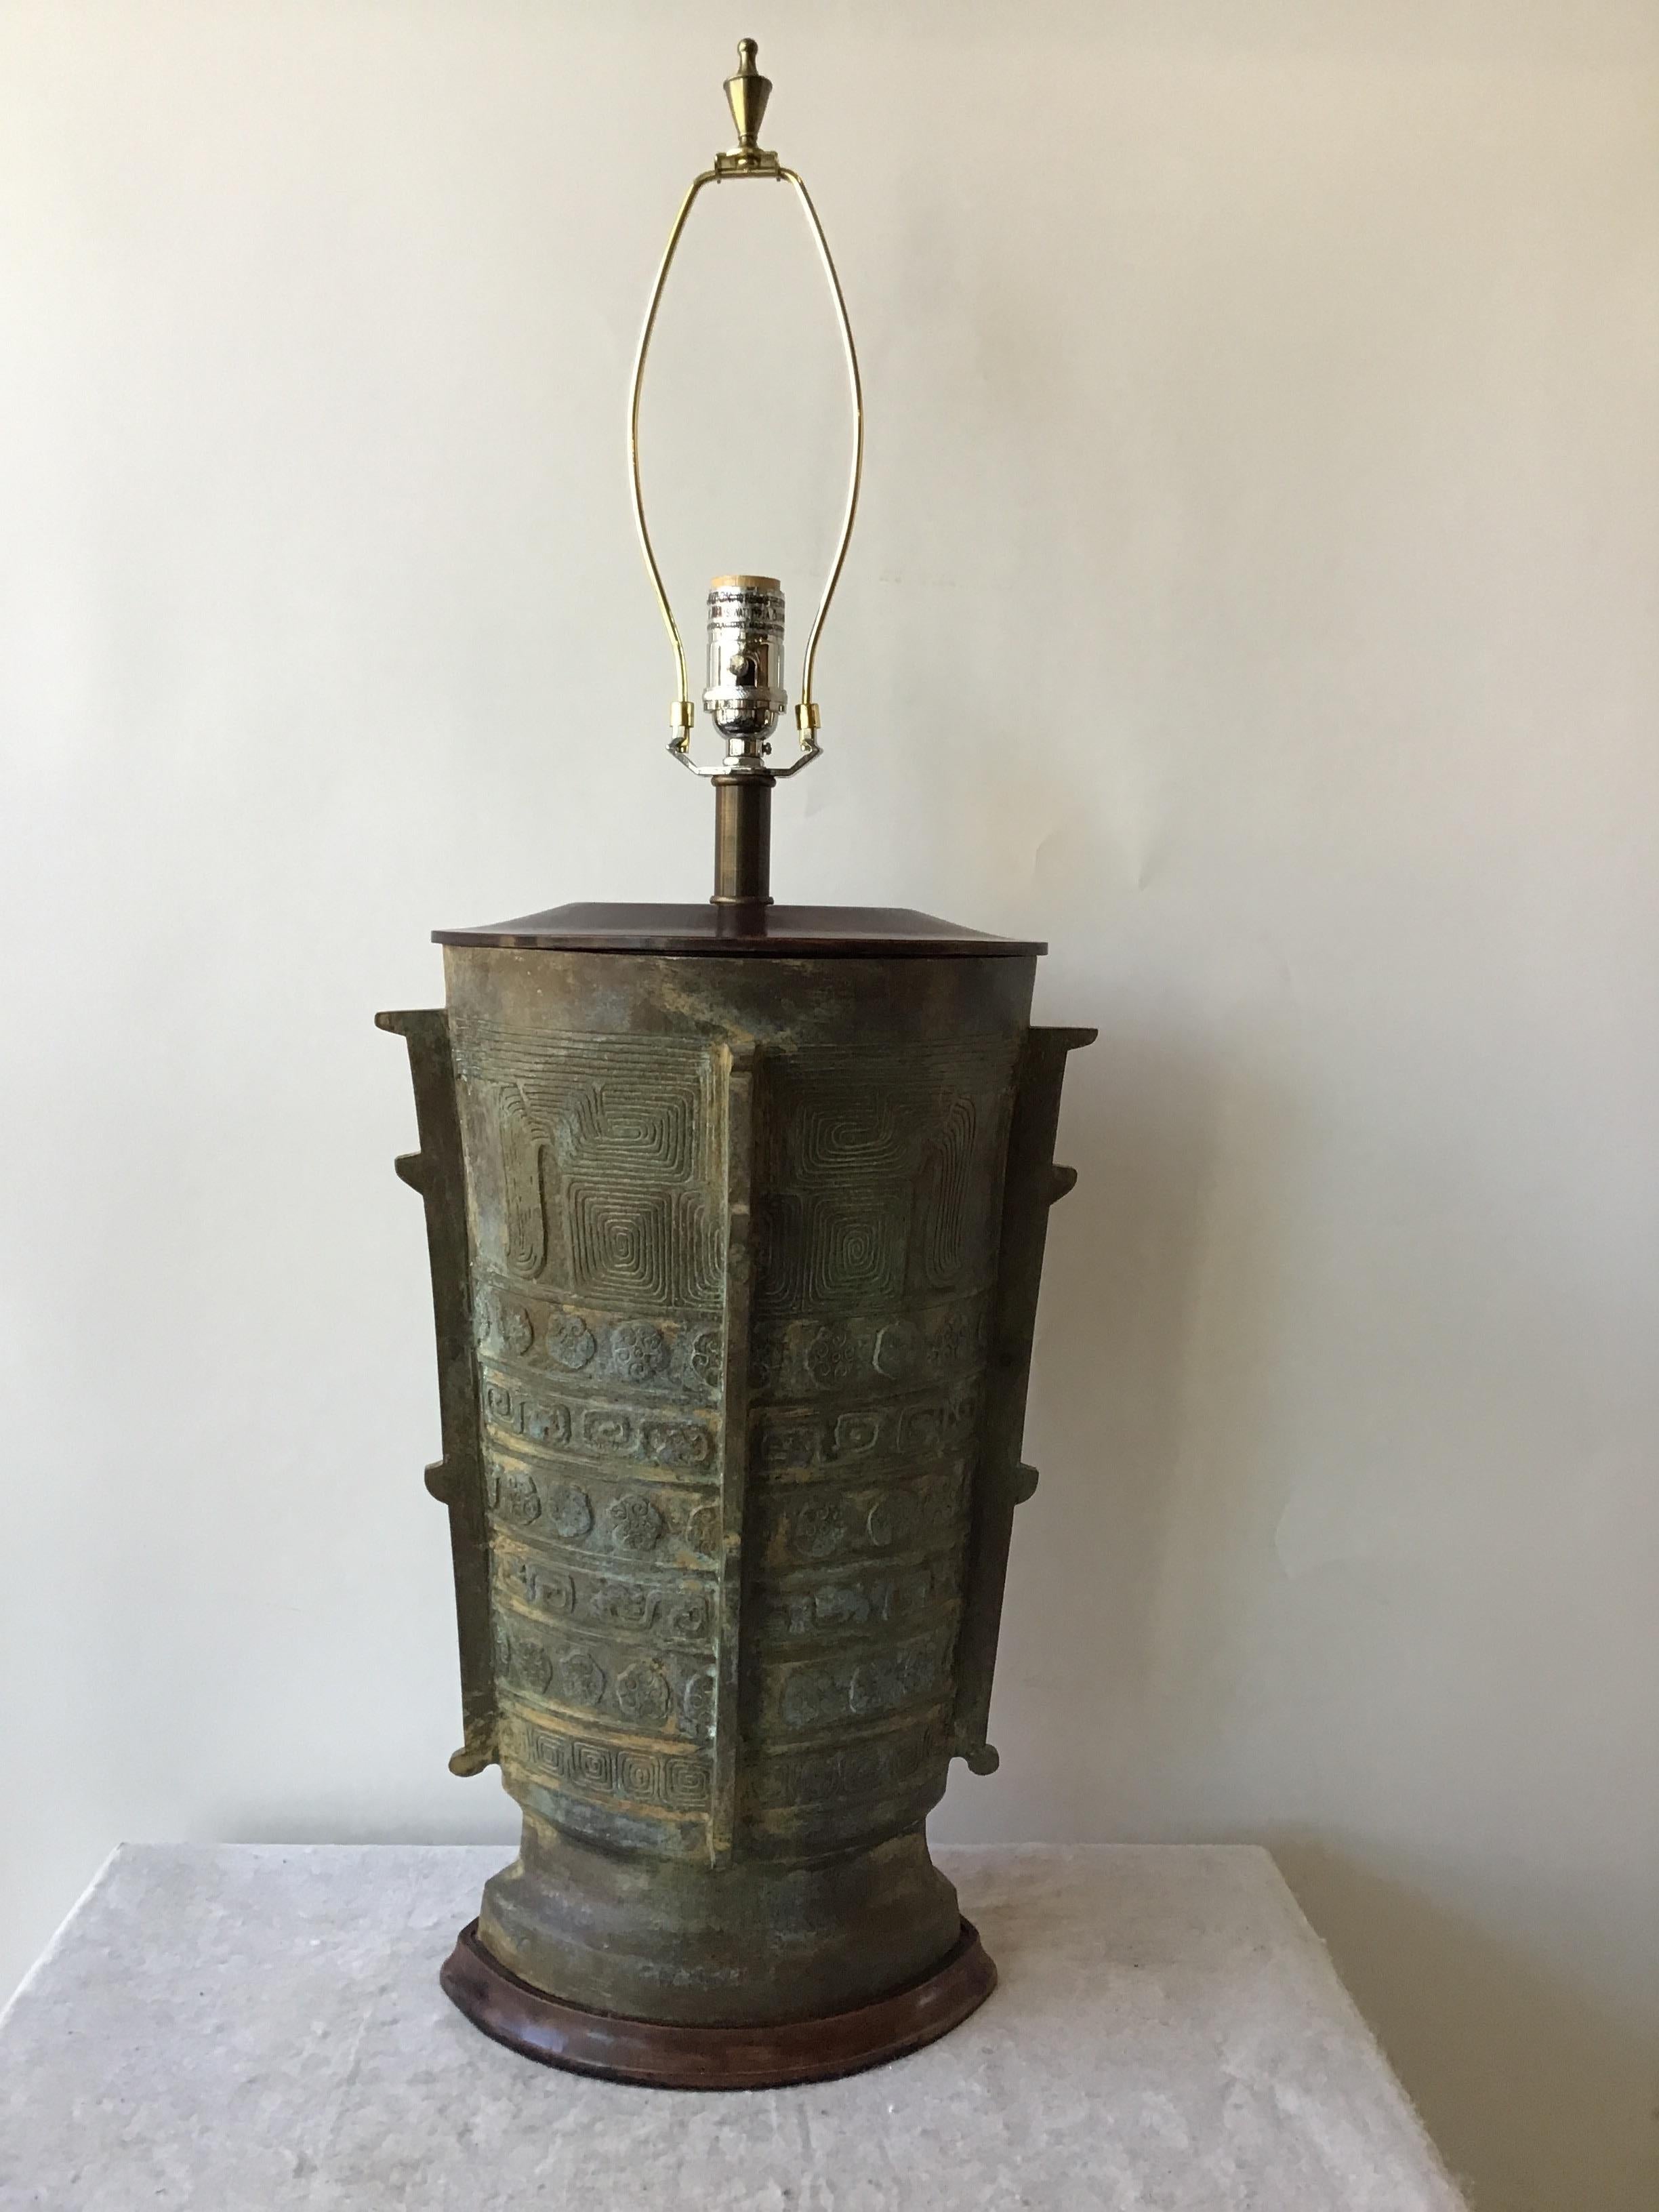 1970s Asian bronze urn lamp. Heavy! Wood base and top. From a Southampton, NY estate.